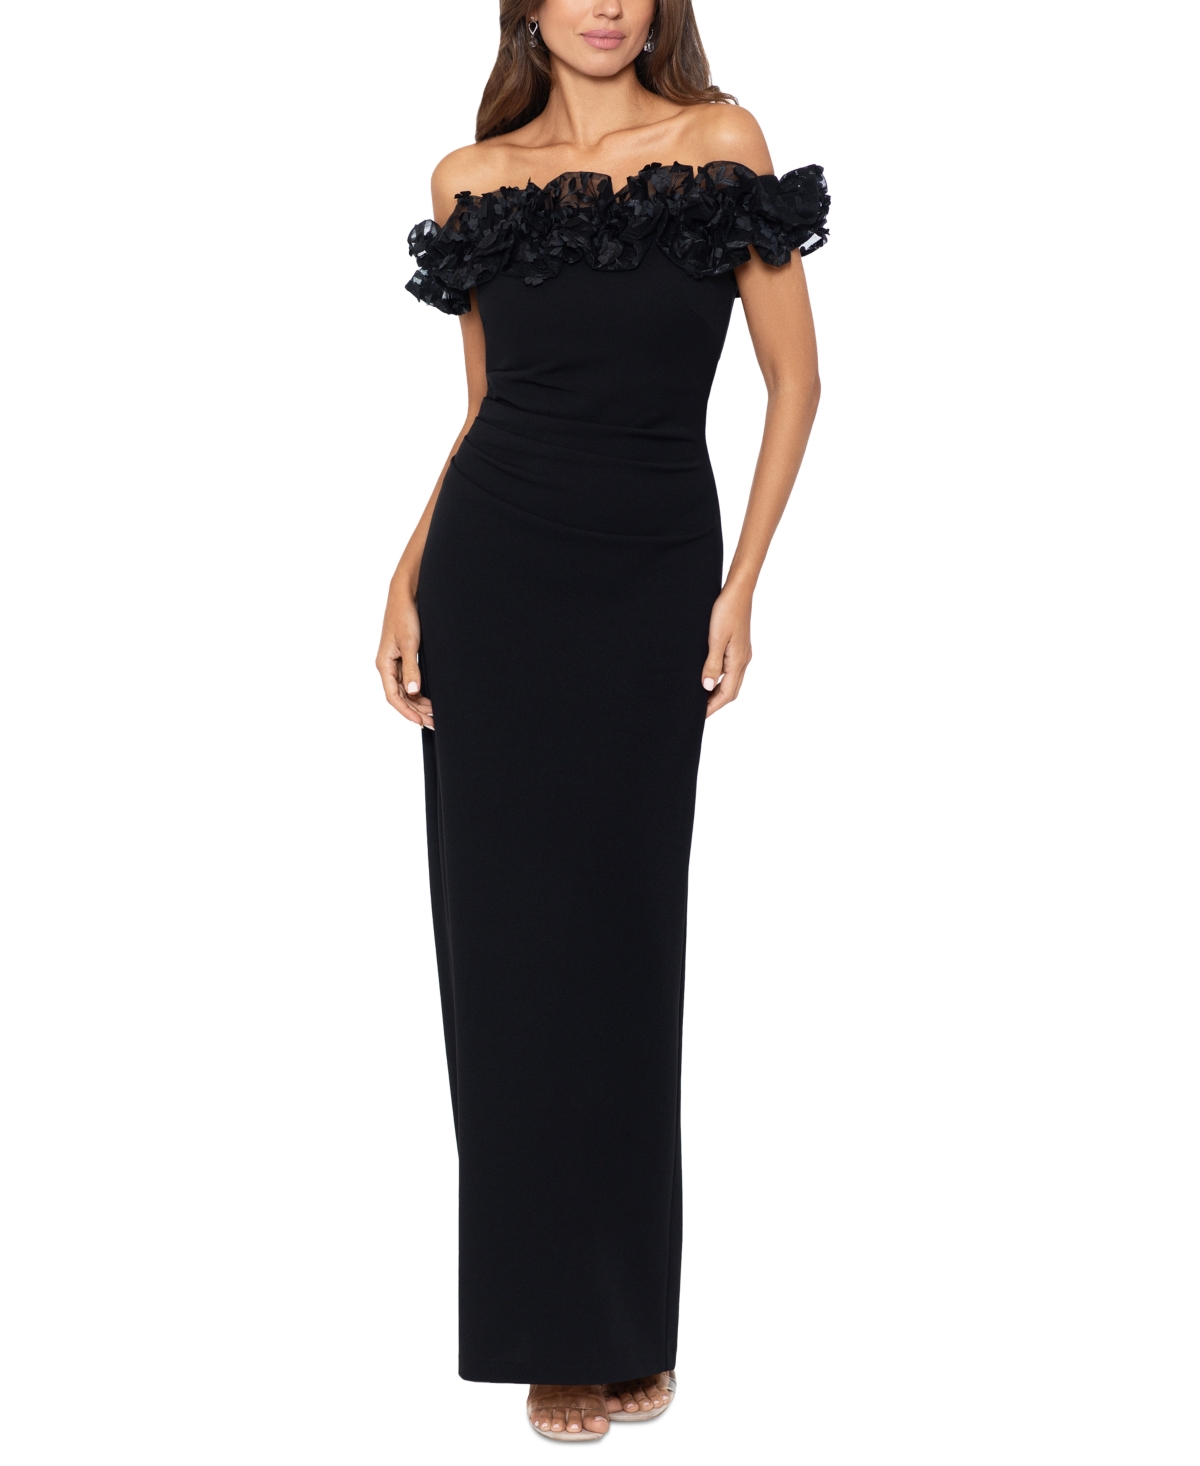 Women's Floral Ruffled Off-The-Shoulder Gown - Black